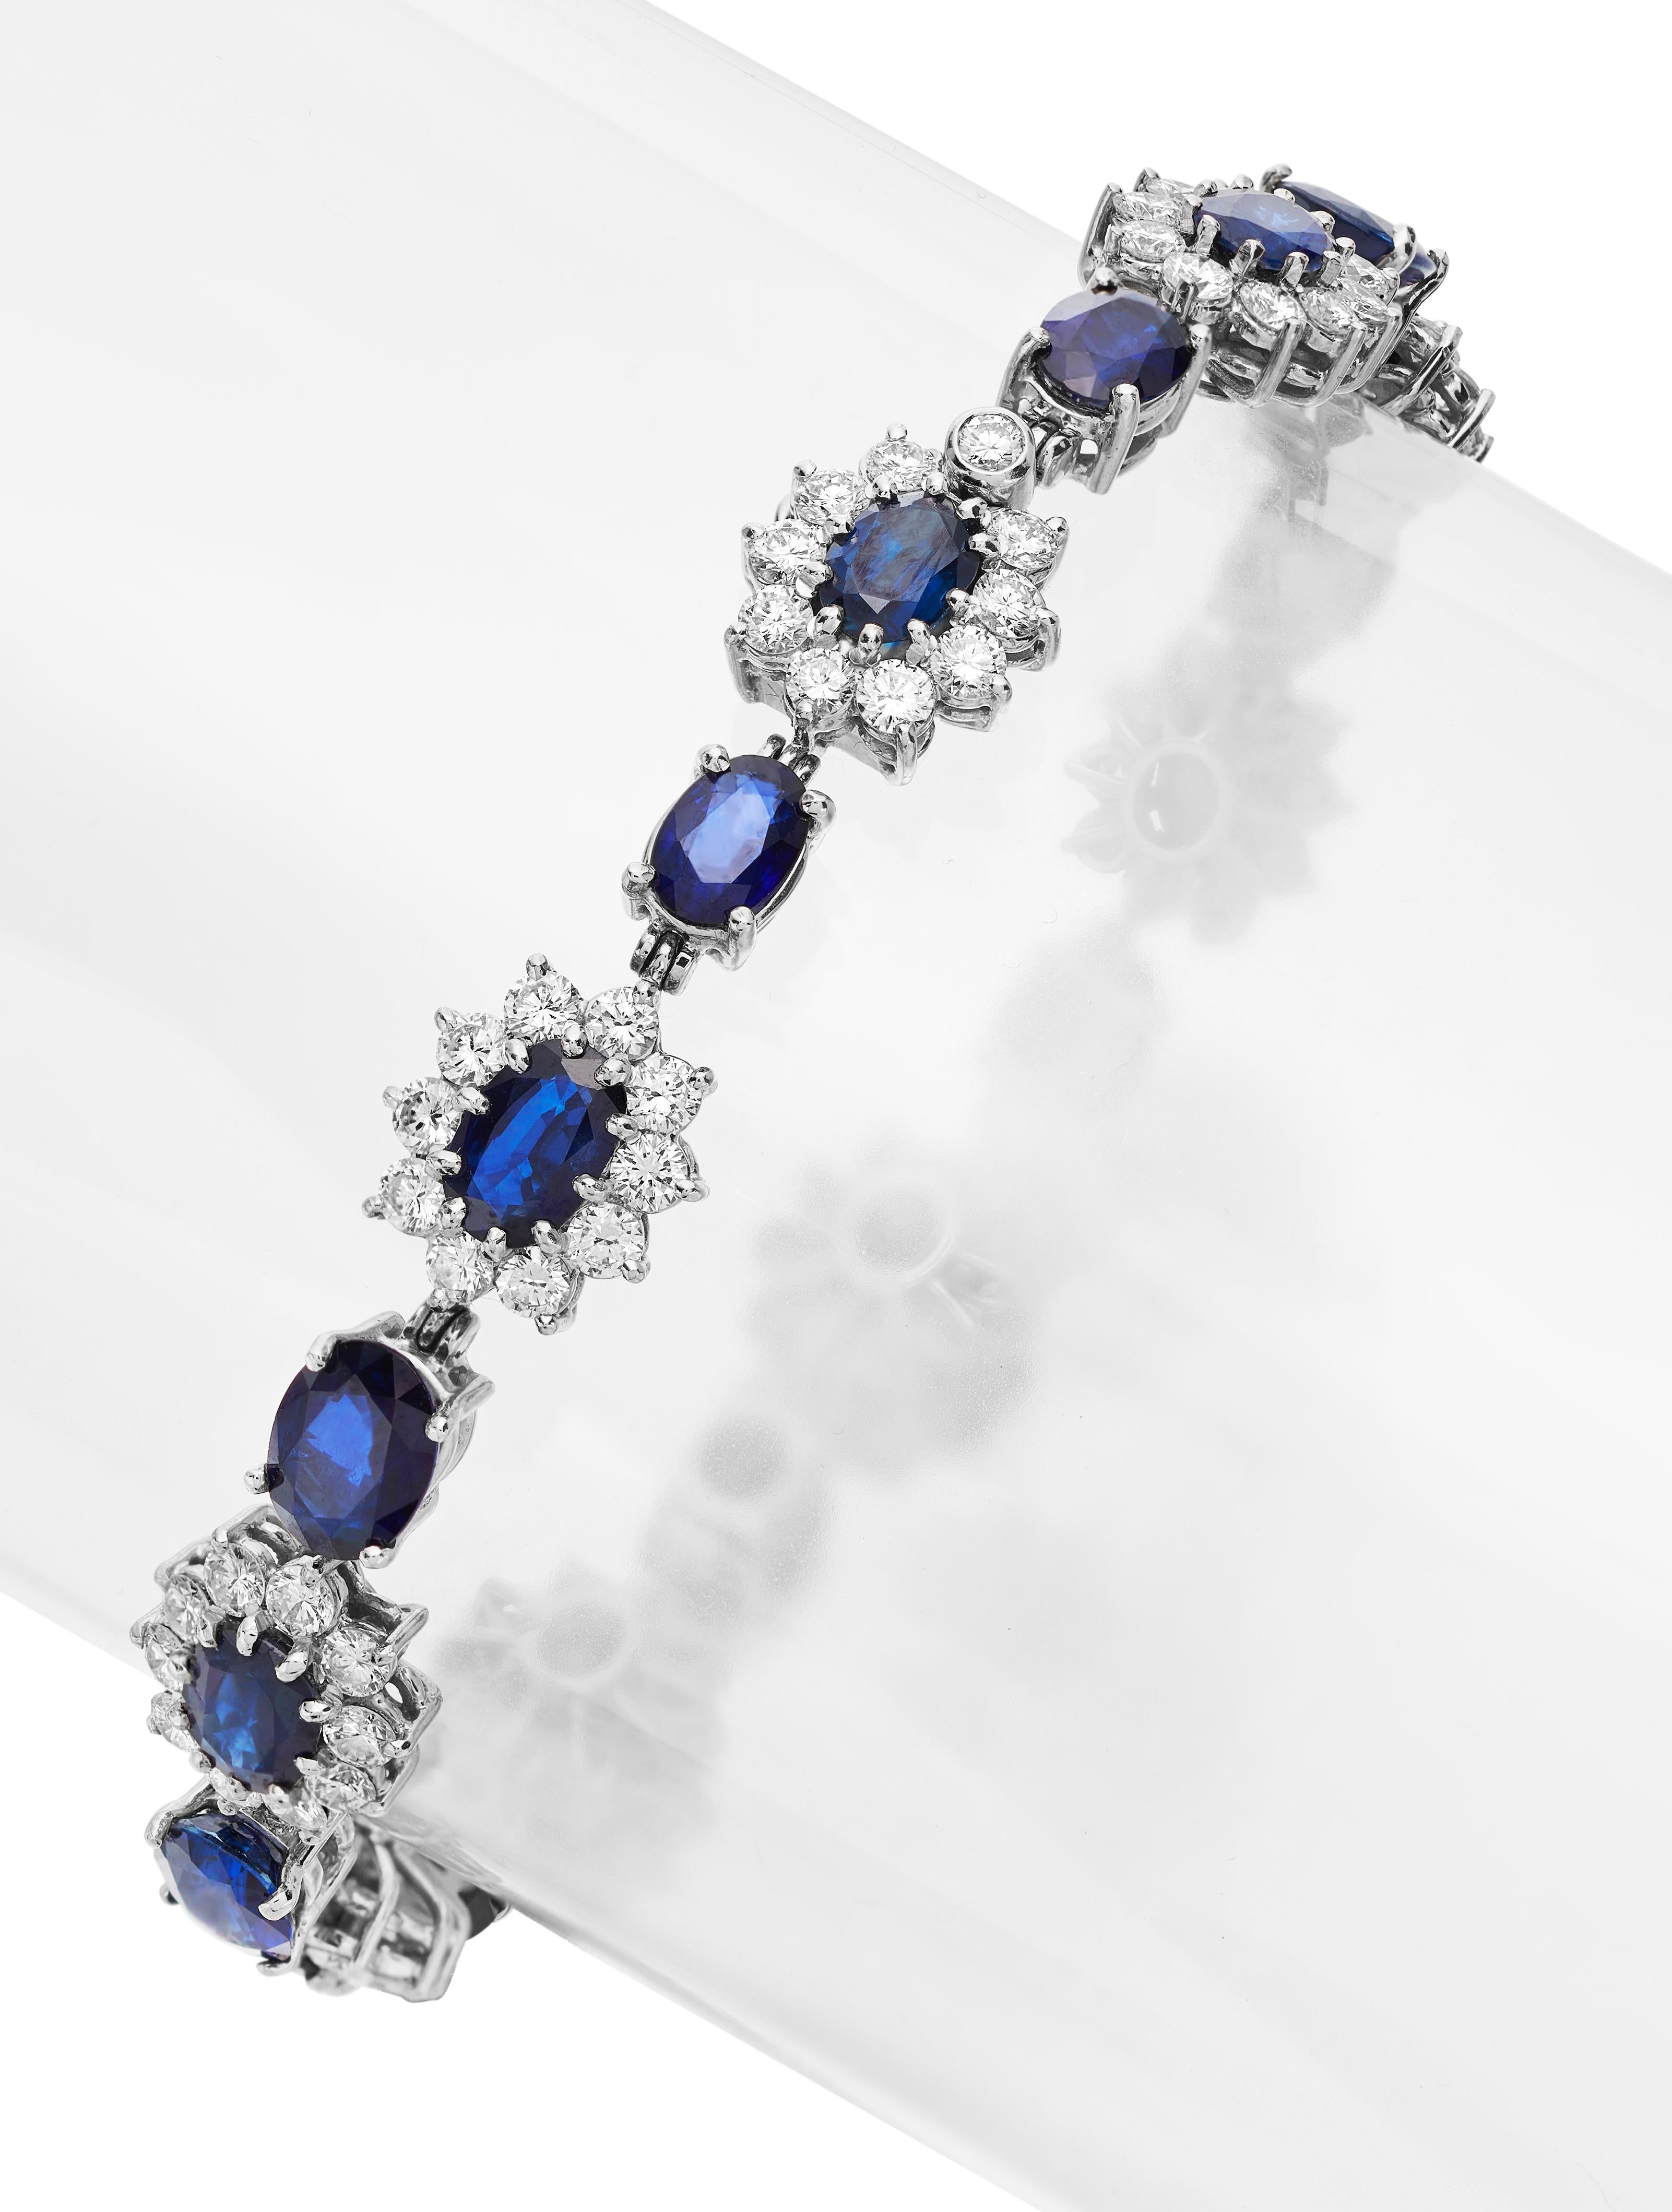 Tantalising 18 ct white gold, diamond and spphire bracelet with an alternating pattern of oval cut deep blue sapphires with white gold border and 10 petal diamond flowers with royal blue centers separated with simple coiled links.  Il est doté d'un